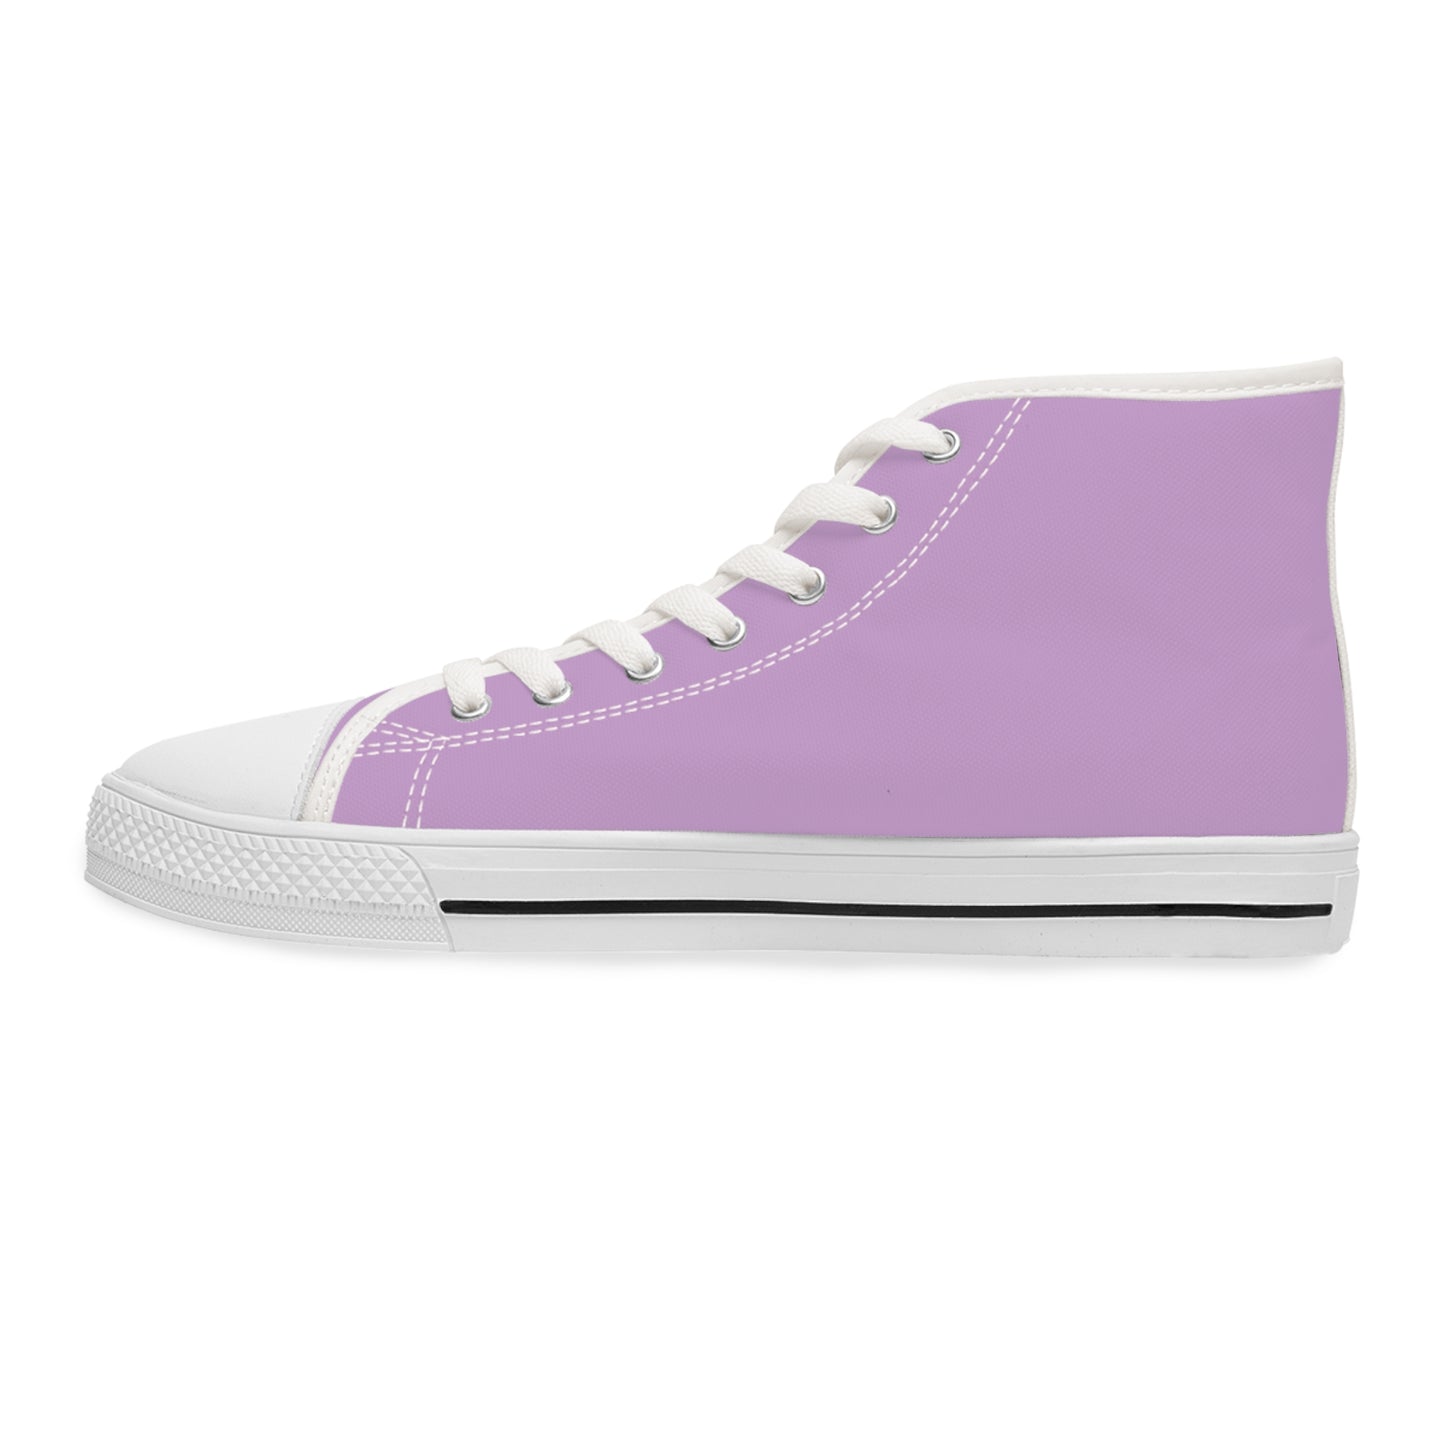 Women's Canvas High Top Solid Color Sneakers - Pinky Purple US 12 White sole